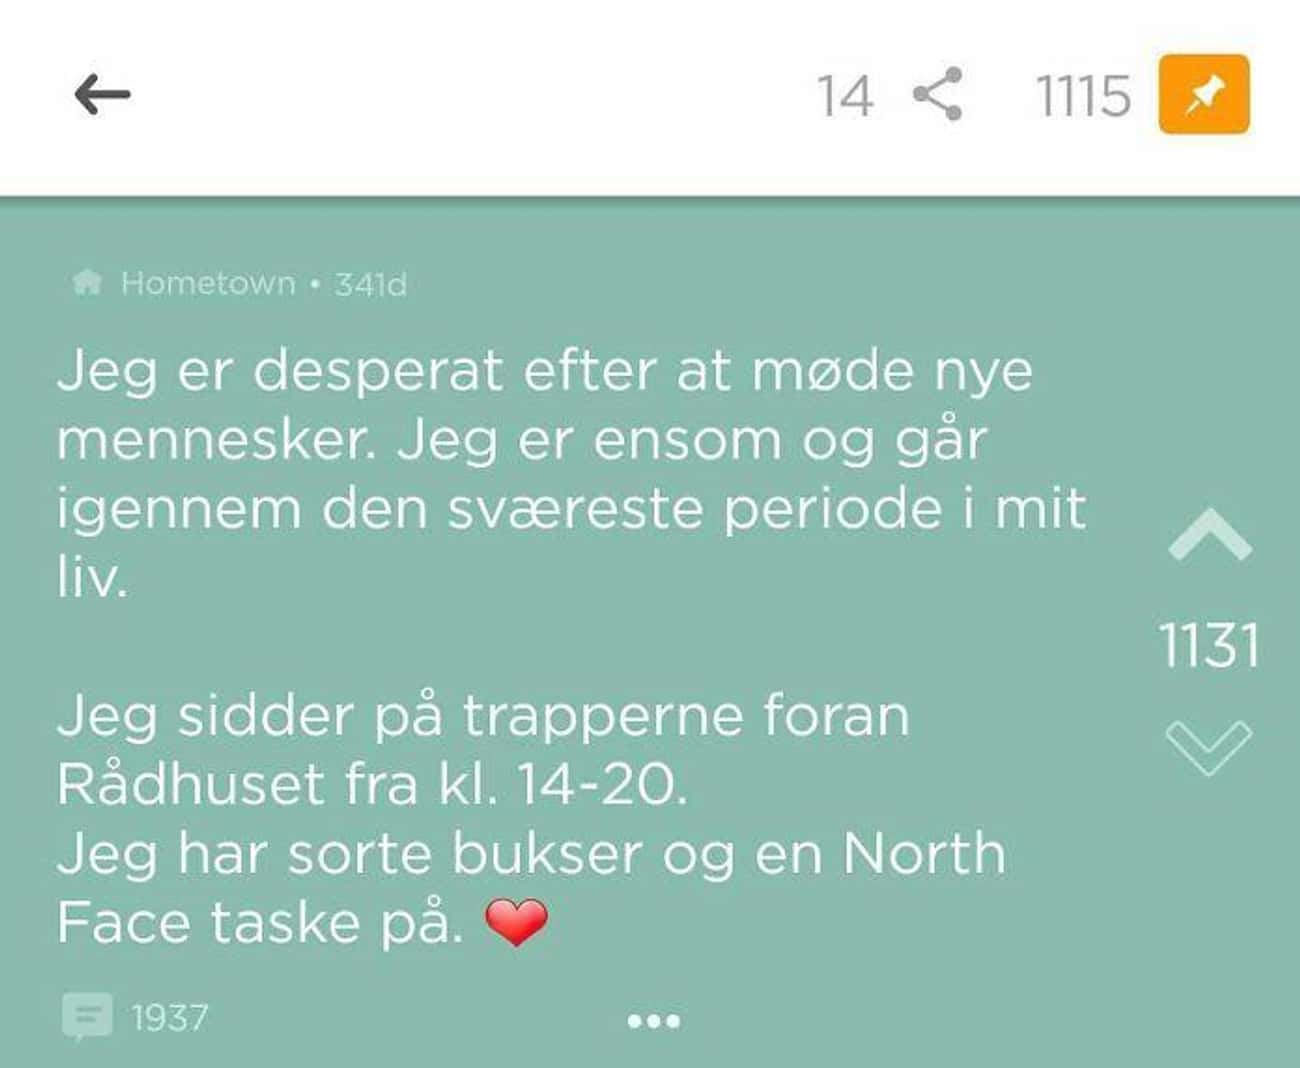 He Posted To Jodel About His Loneliness